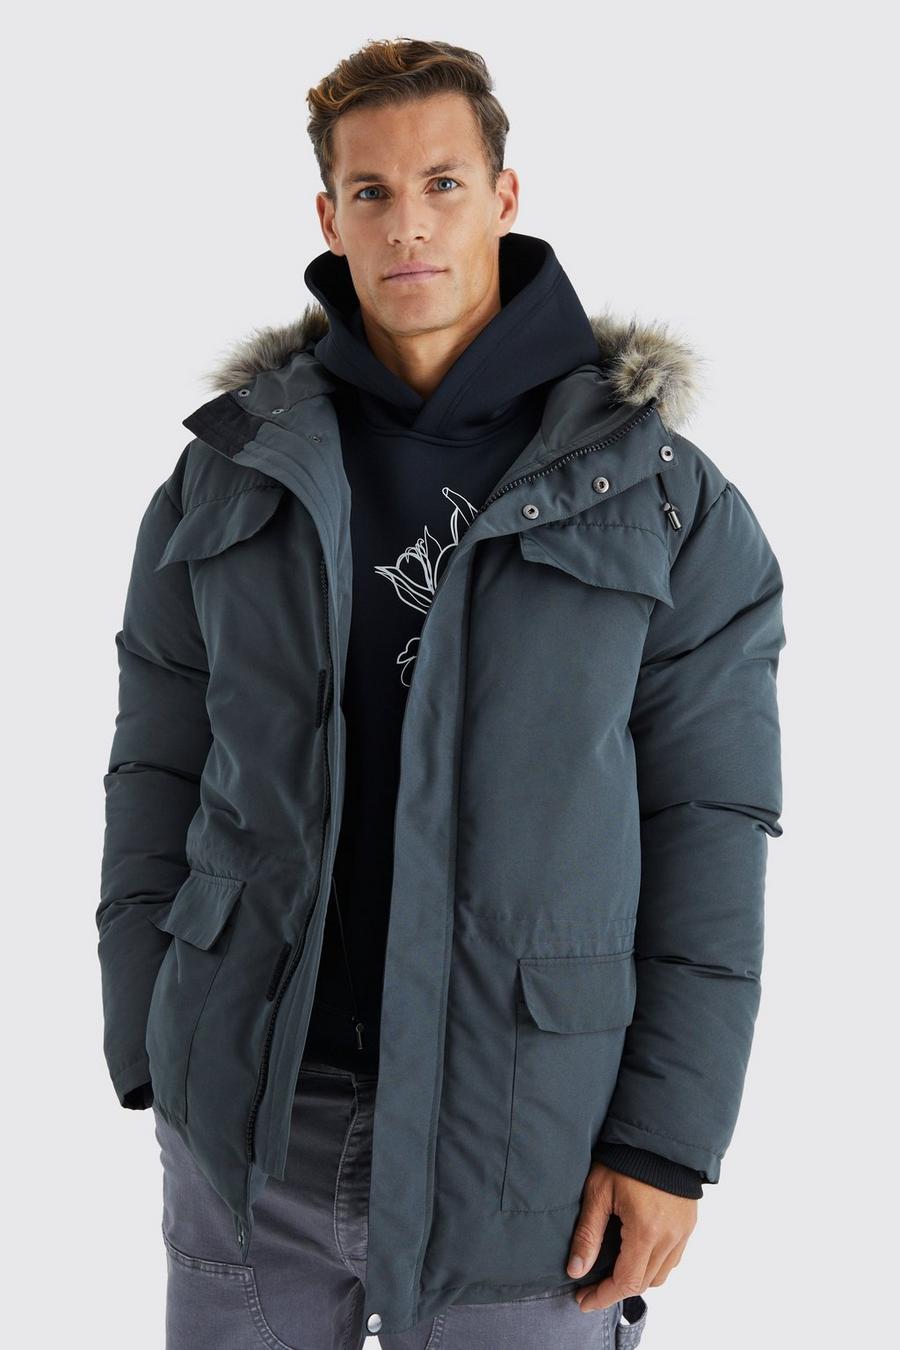 Men's Tall Faux Fur Hooded Arctic Parka Jacket in Charcoal | Boohoo UK